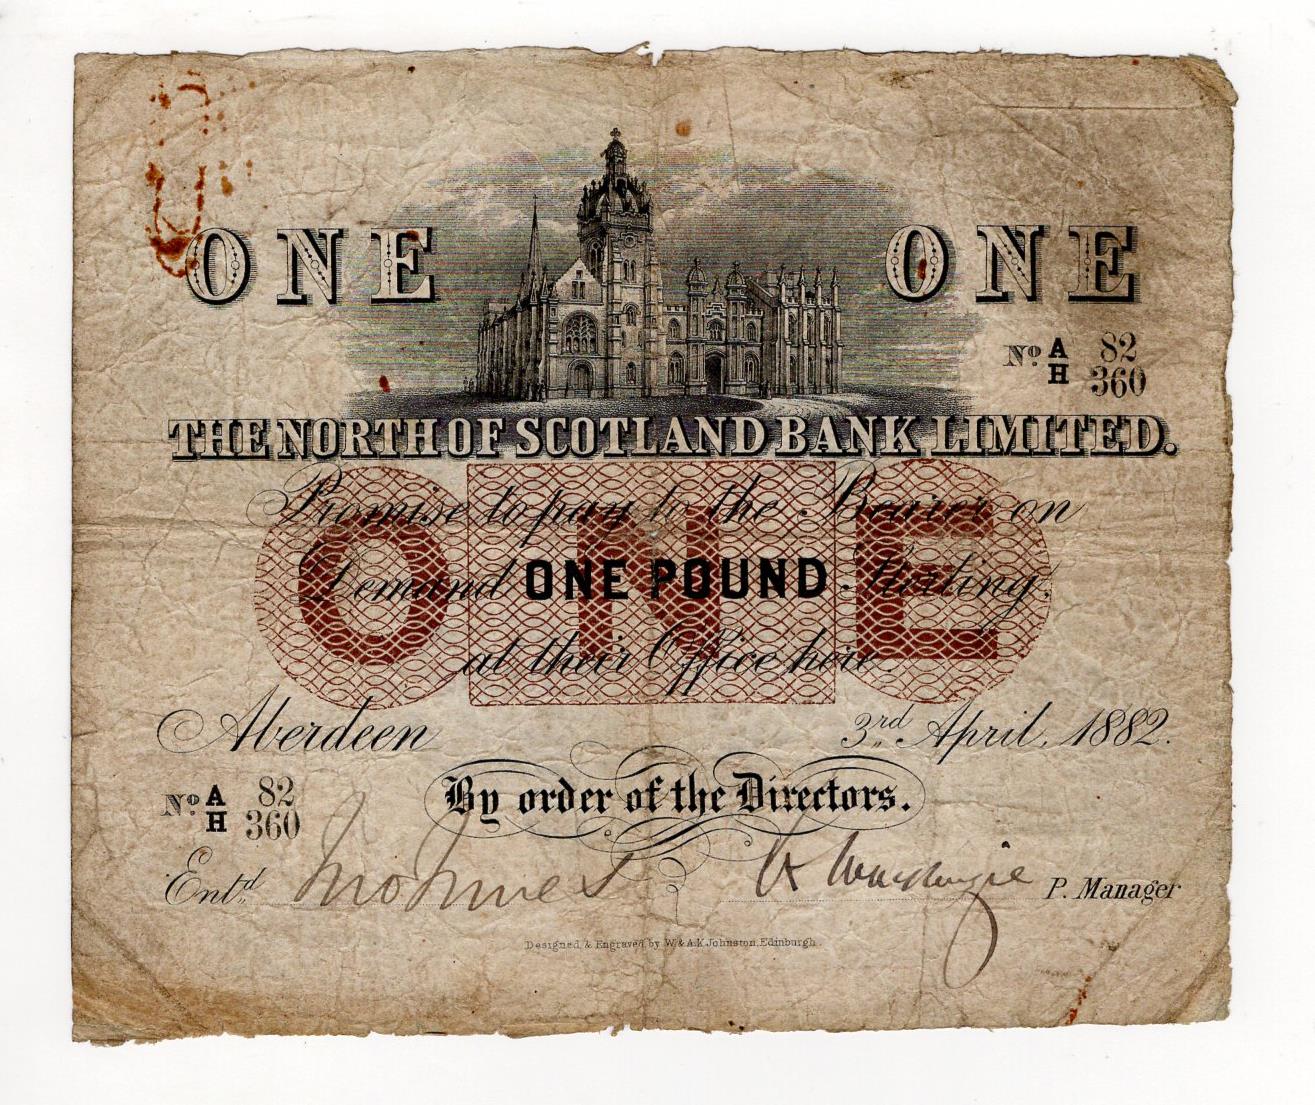 Scotland, North of Scotland Bank Limited 1 Pound dated 3rd April 1882, handsigned by Manager and one